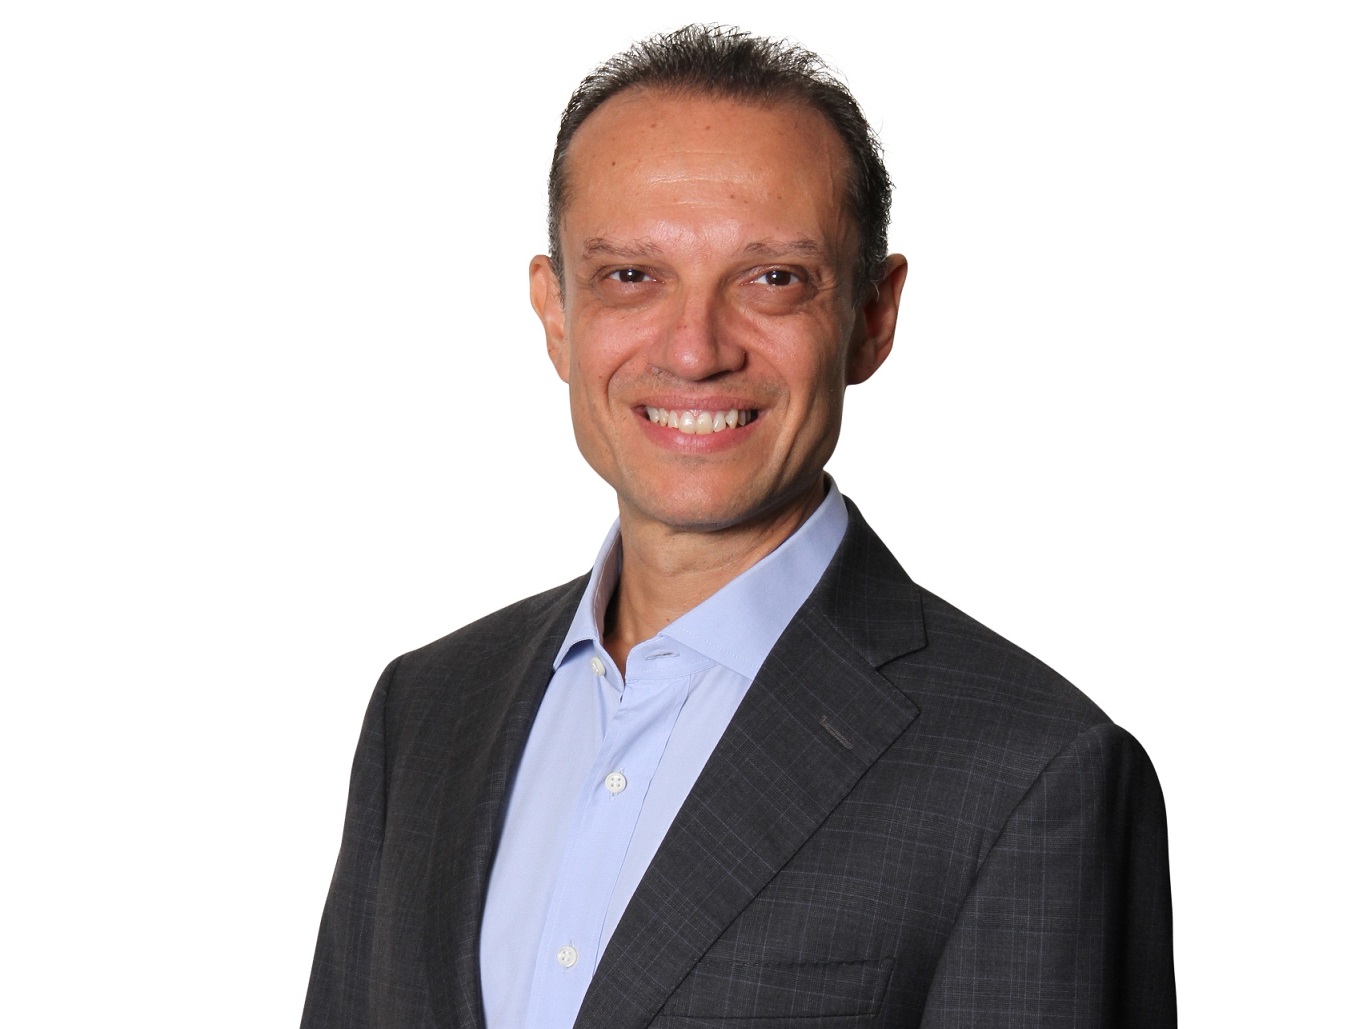 TM appoints Rafaai Samsi as chief technology and innovation officer